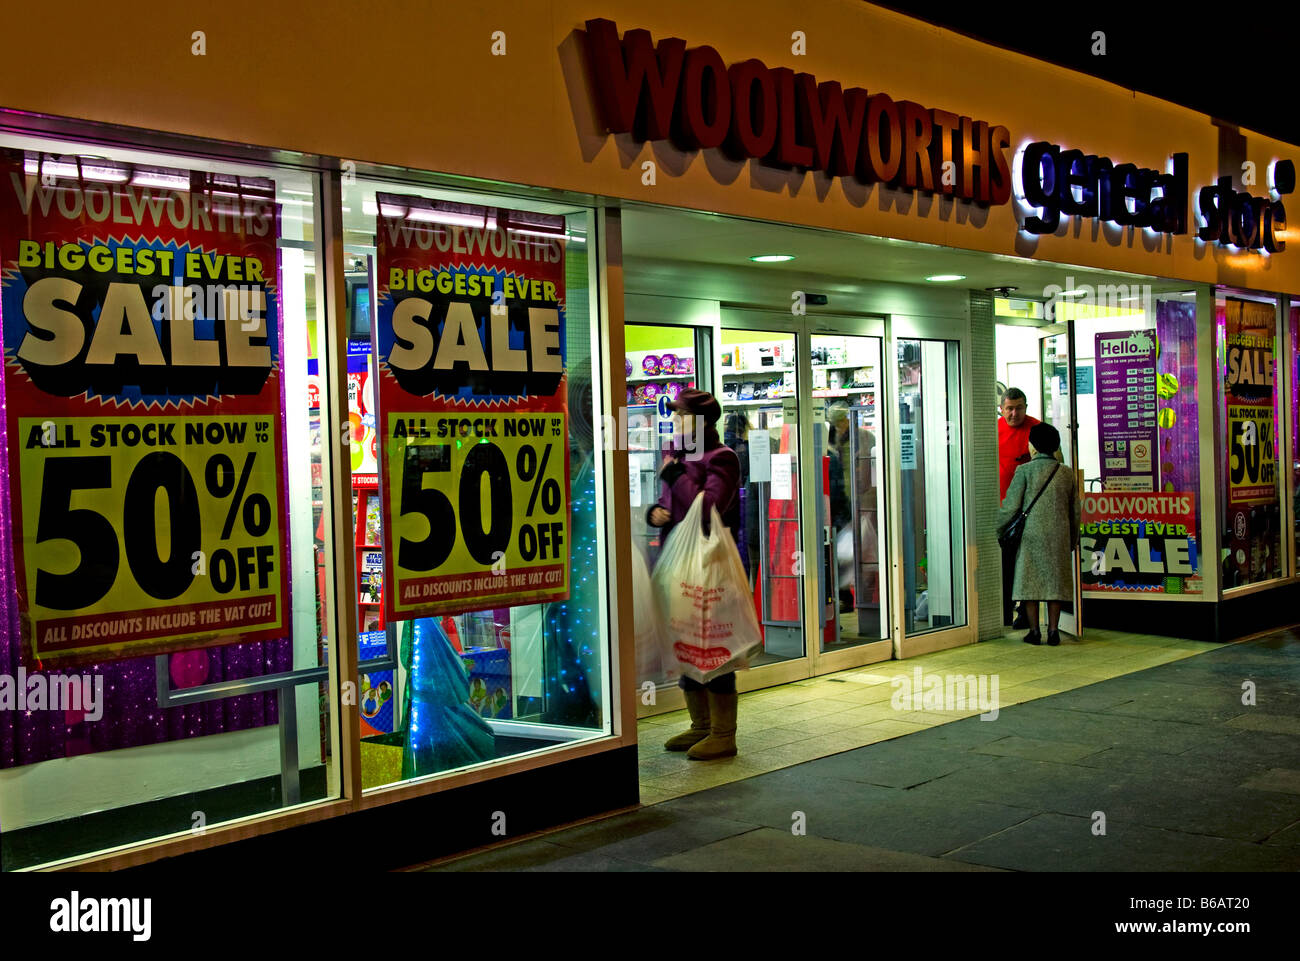 Woolworths shopping store which is in administration with Sale signs in the windows, Edinburgh, Scotland, UK, Europe Stock Photo